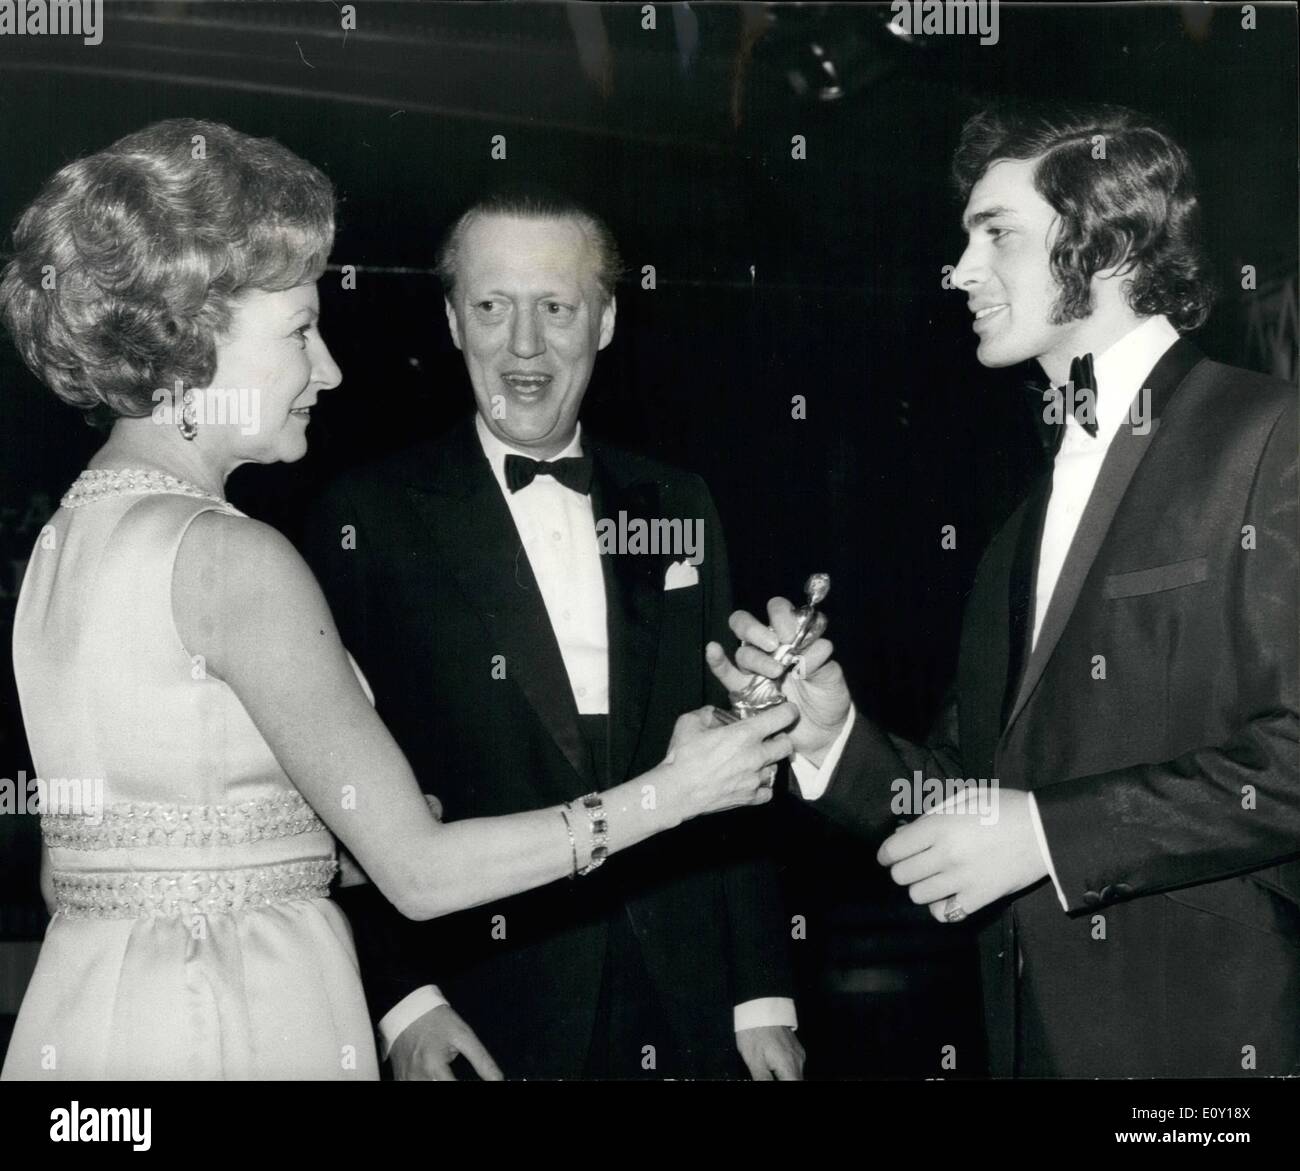 Mar. 03, 1968 - Prince George And Princess Anne Of Denmark Present The Carl Alan Awards: Prince Georg and Princess anne of Denmark tonight presented the annual Carl Alan awards for outstanding achievements in dancing and music at the Empire Ballroom, Leicester Square. Photo shows Singer Engelbert Humperdinck receives the Carl-Alan award from Princess Anne watched by her husband Prince Georg. Stock Photo